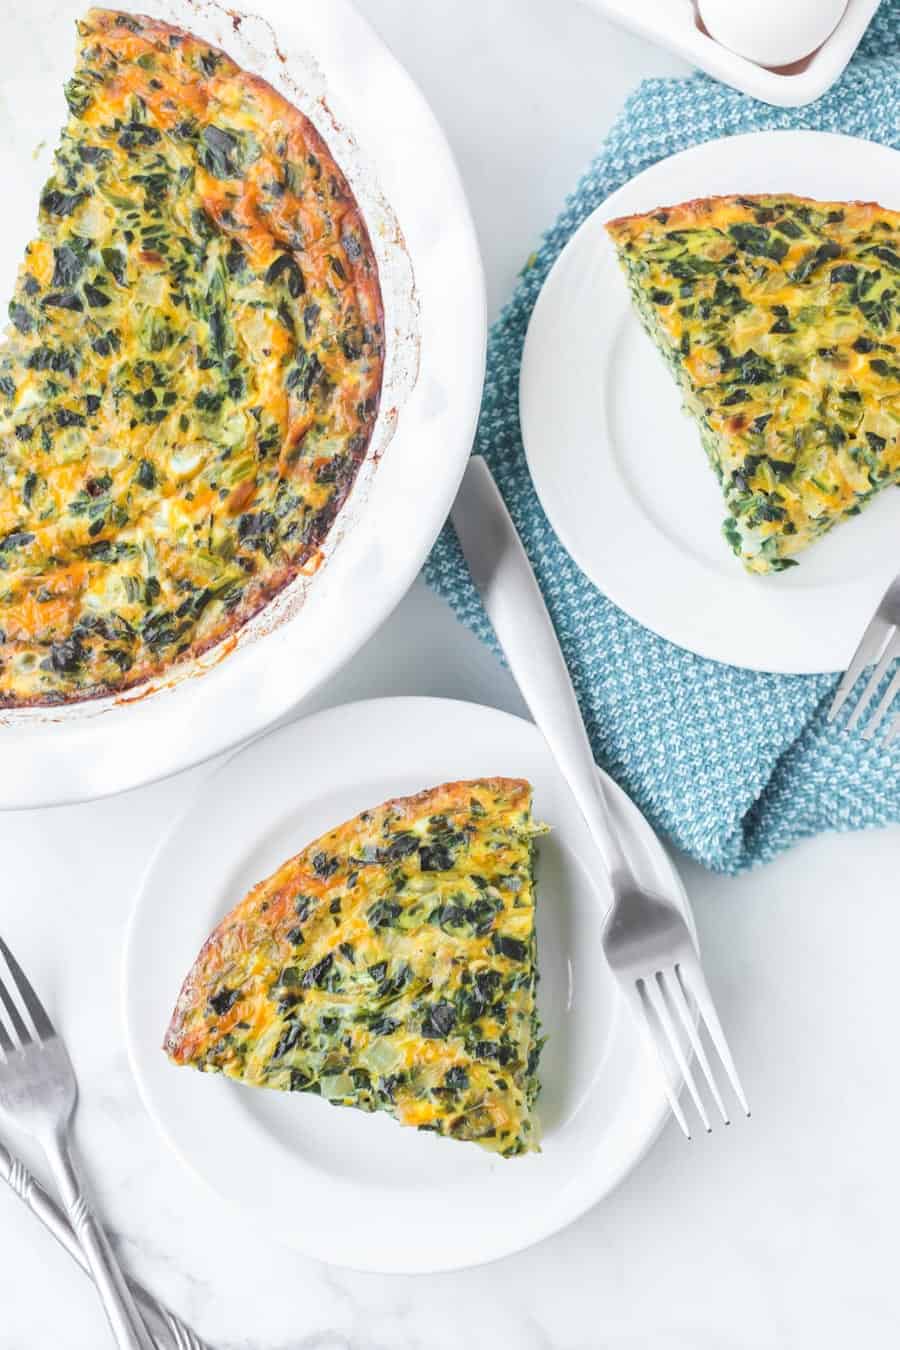 Straightforward yet flavorful, crustless spinach quiche is an easy and healthy breakfast that you can customize or keep simple! #spinachquiche #crustlessquiche #breakfast #quiche #healthybreakfasts